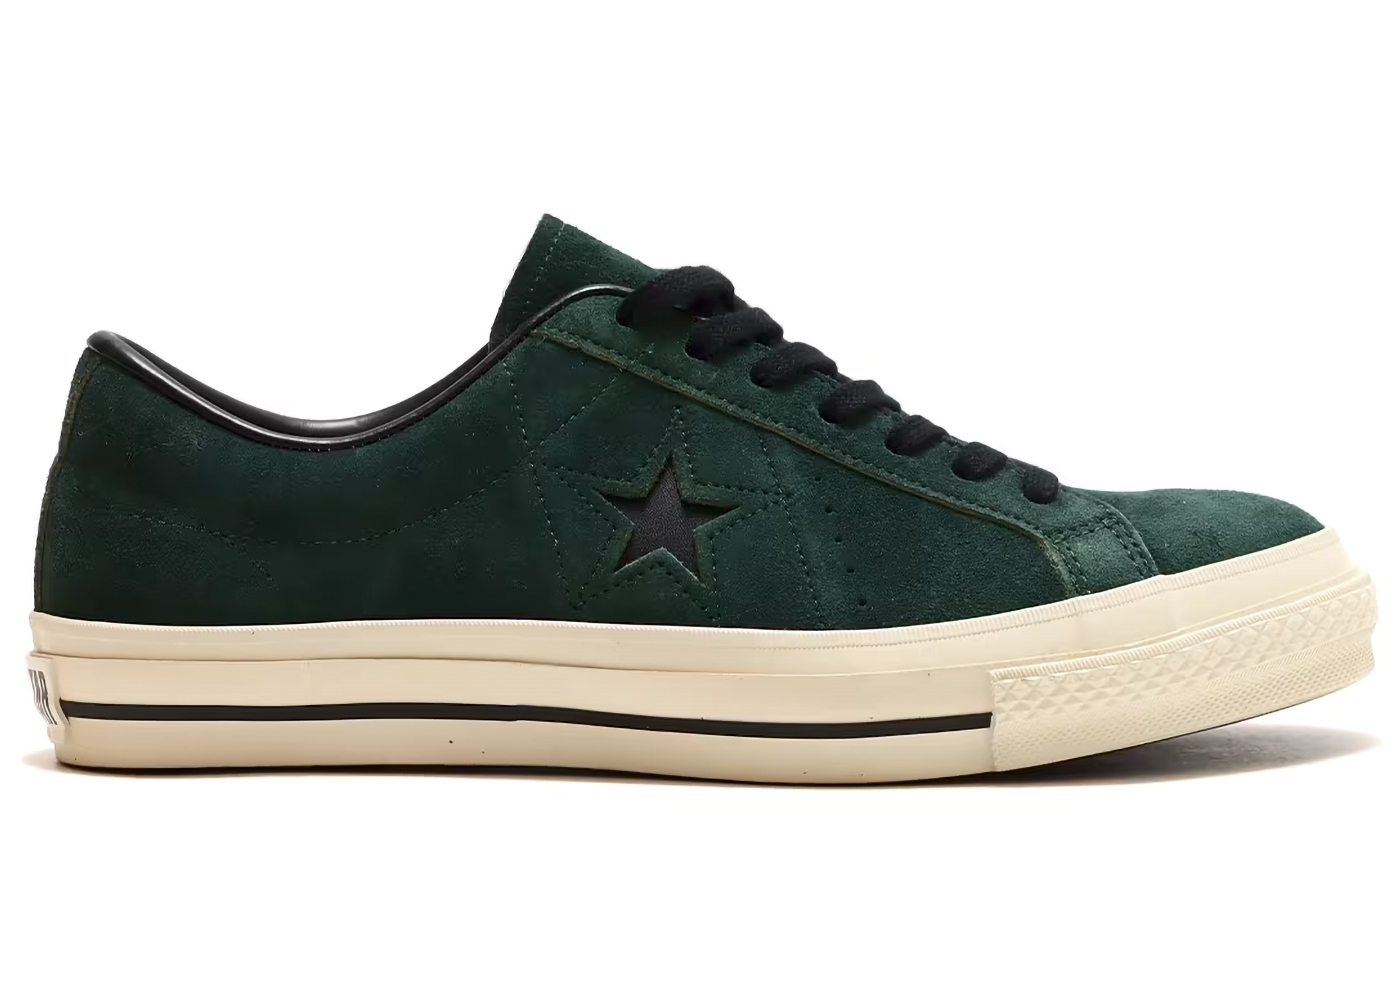 Converse One Star Made in Japan Suede Green Men's - 35200510 - US